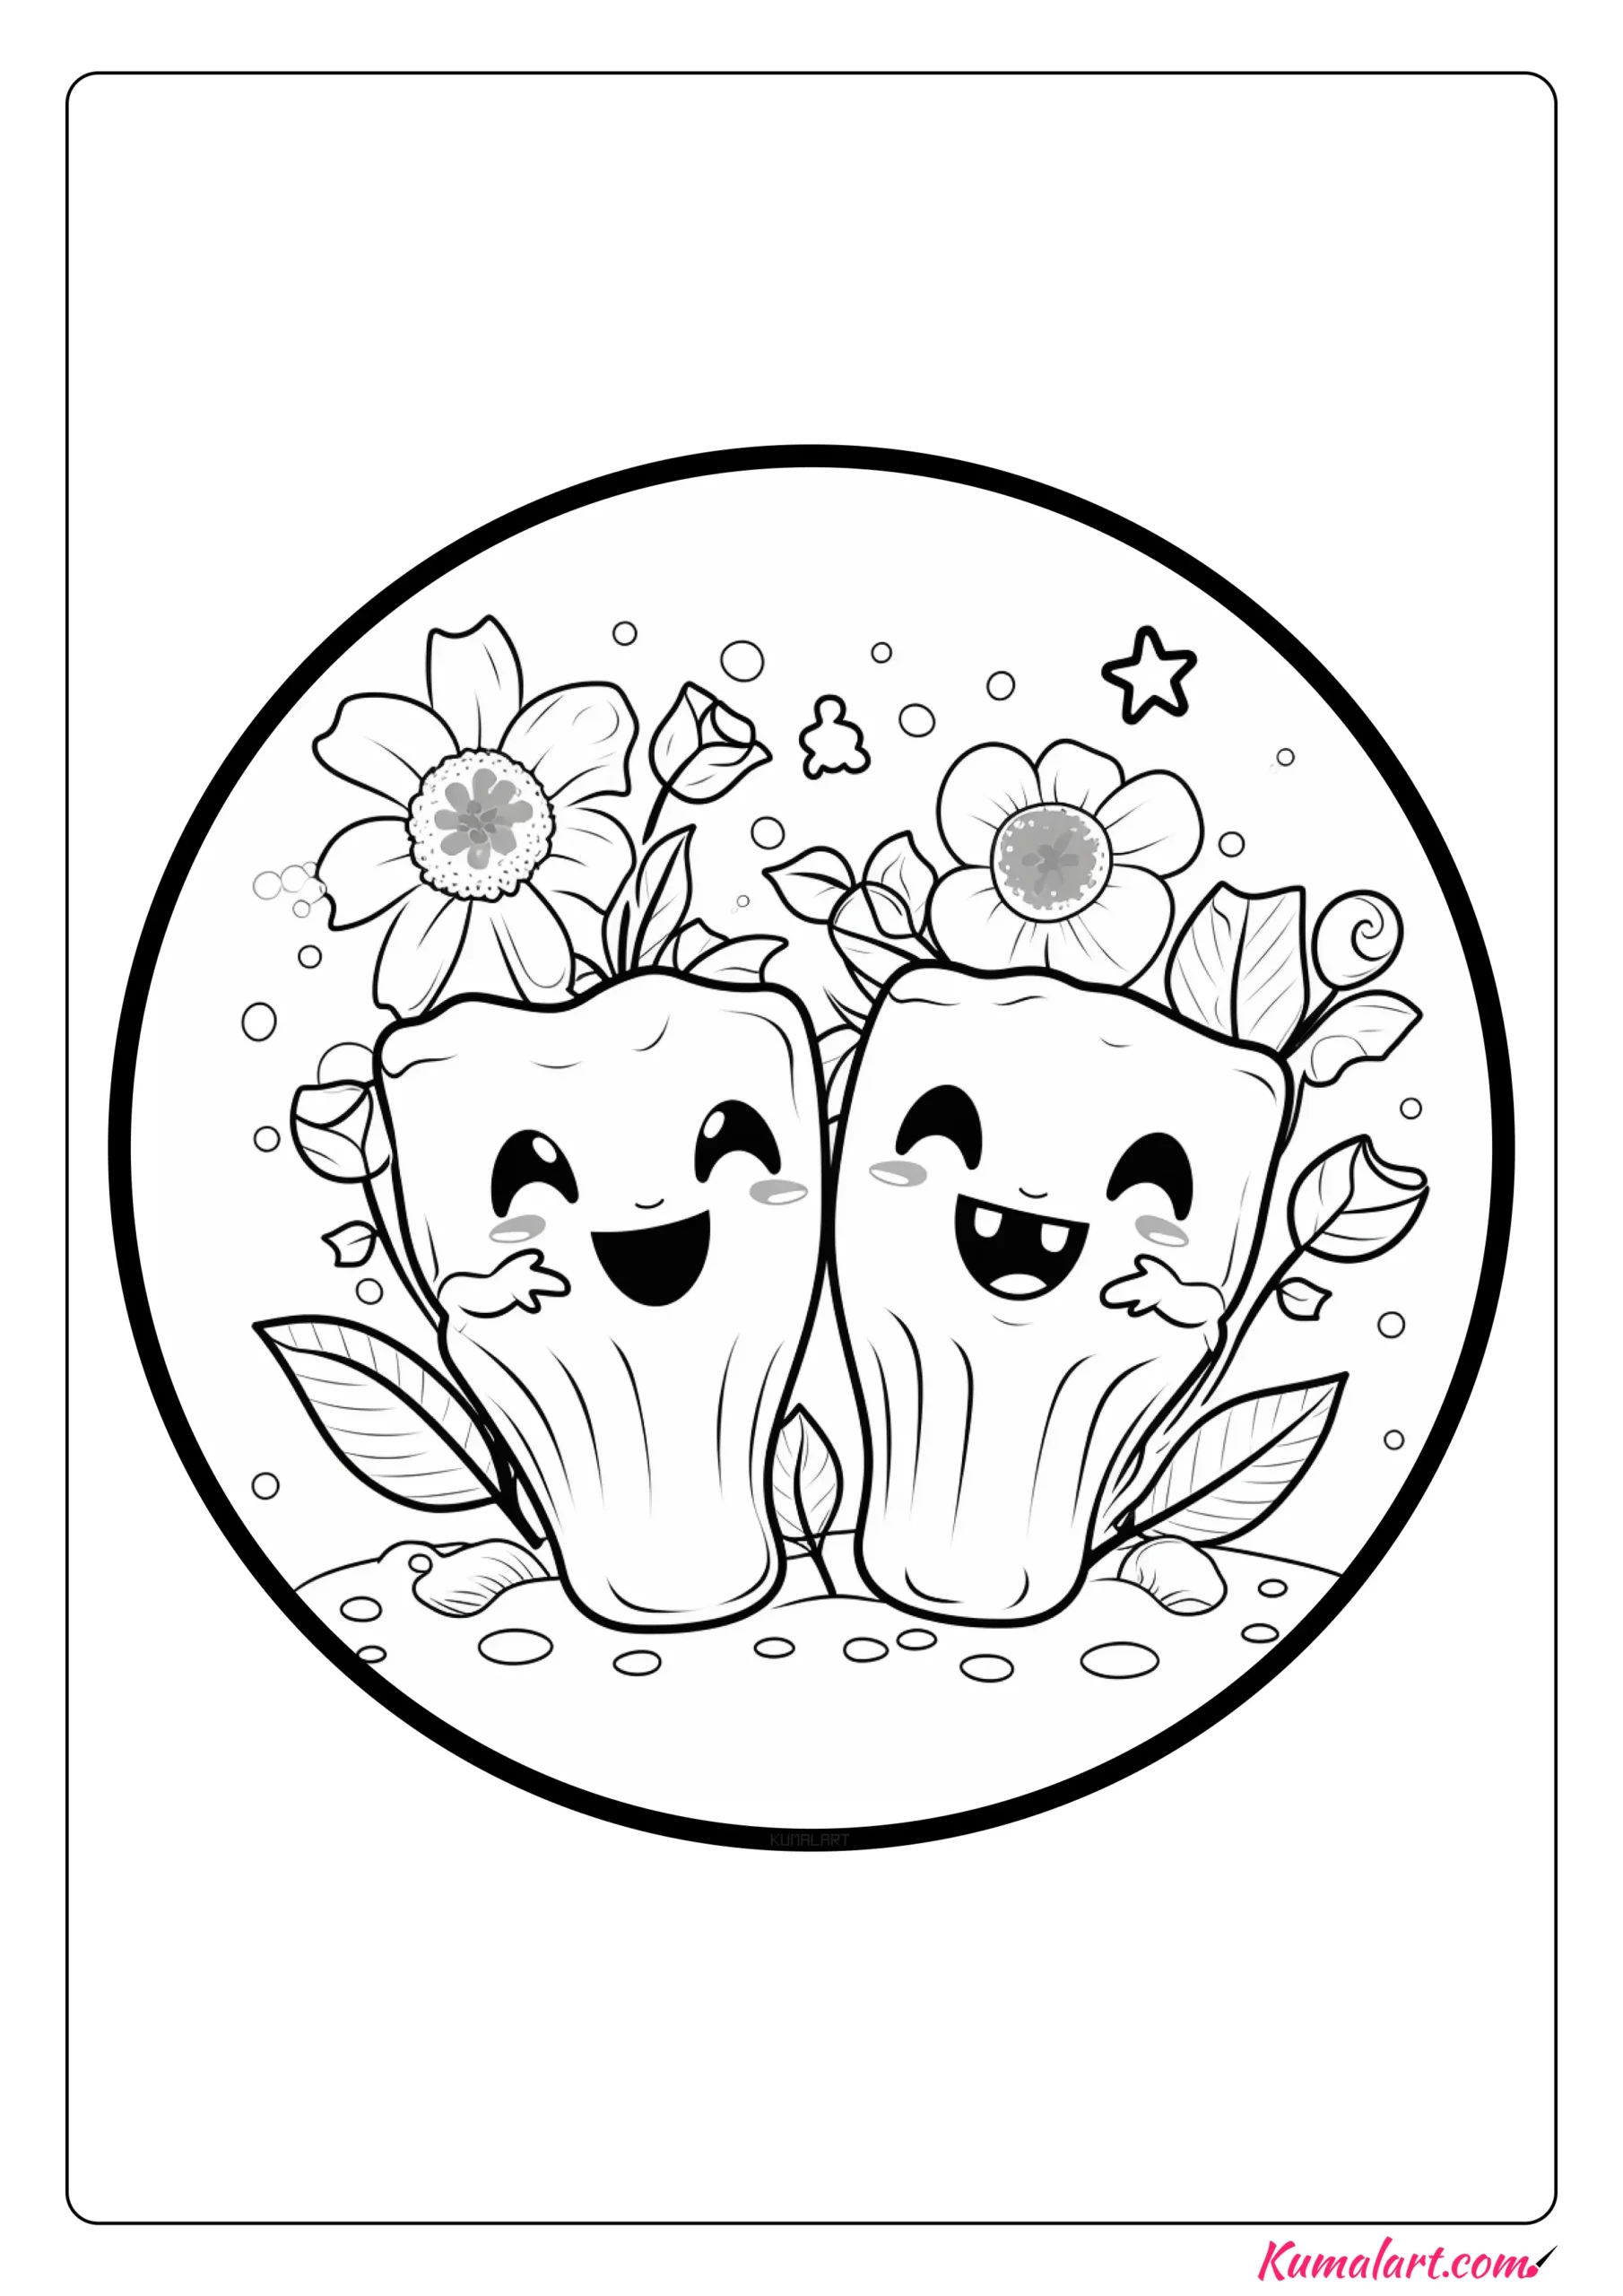 Appealing Tooth Brushing Coloring Page